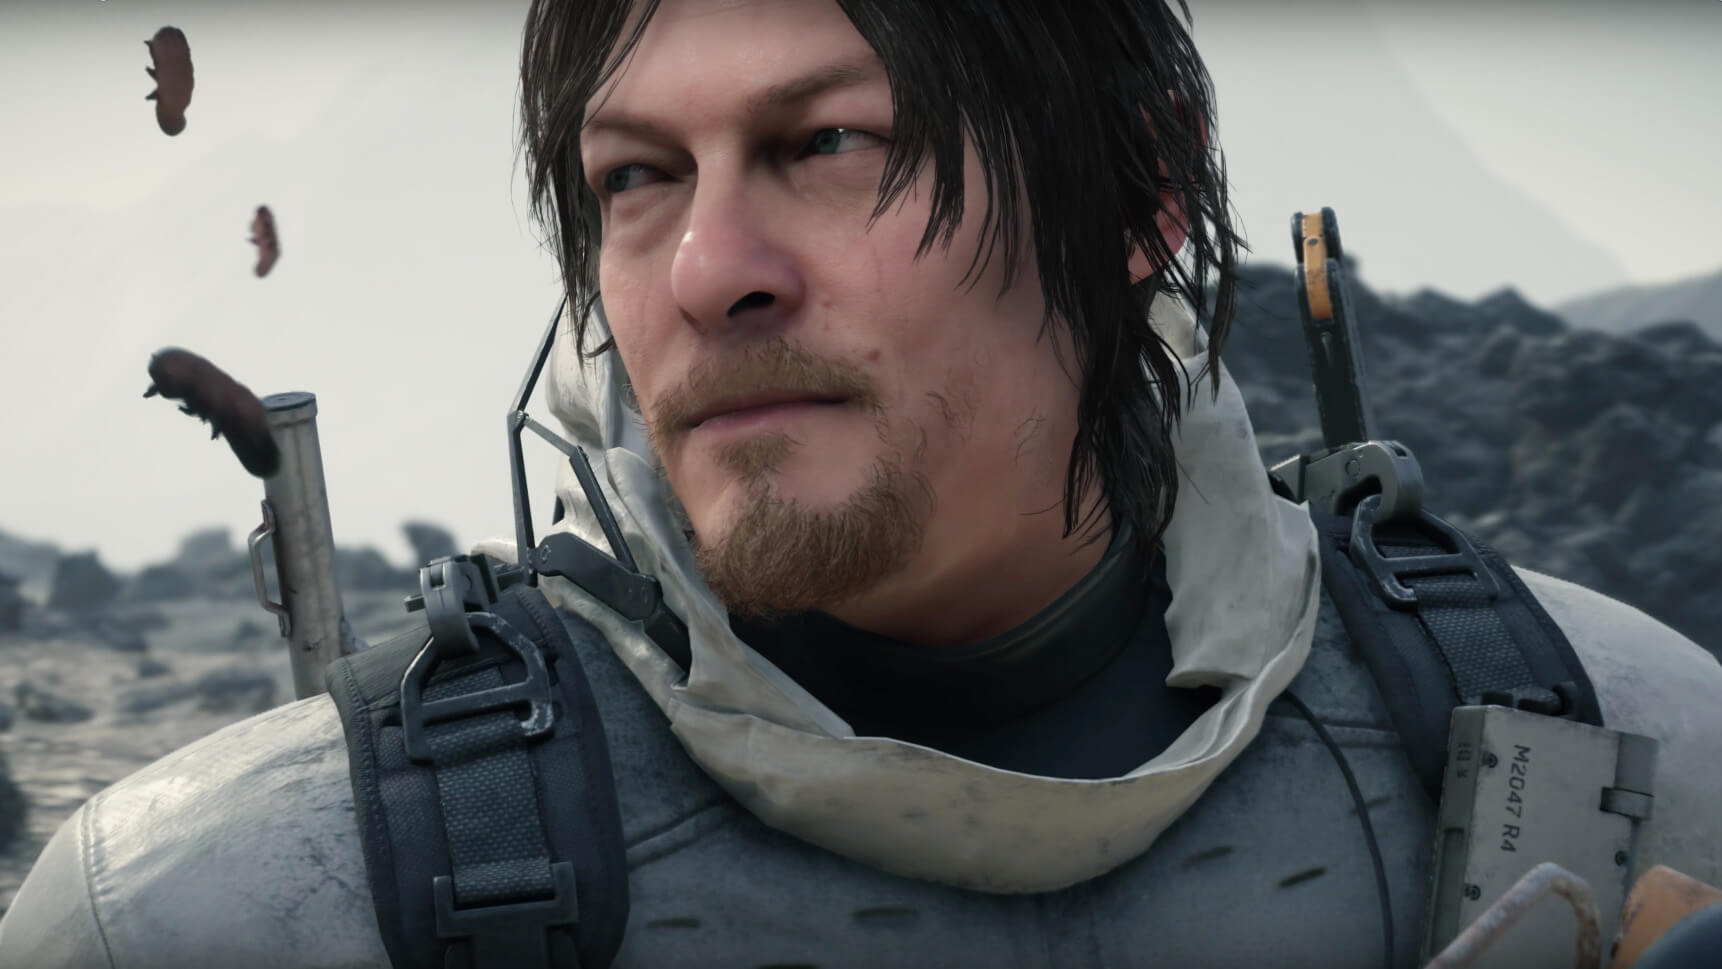 Norman Reedus is in talks with Hideo Kojima for future projects